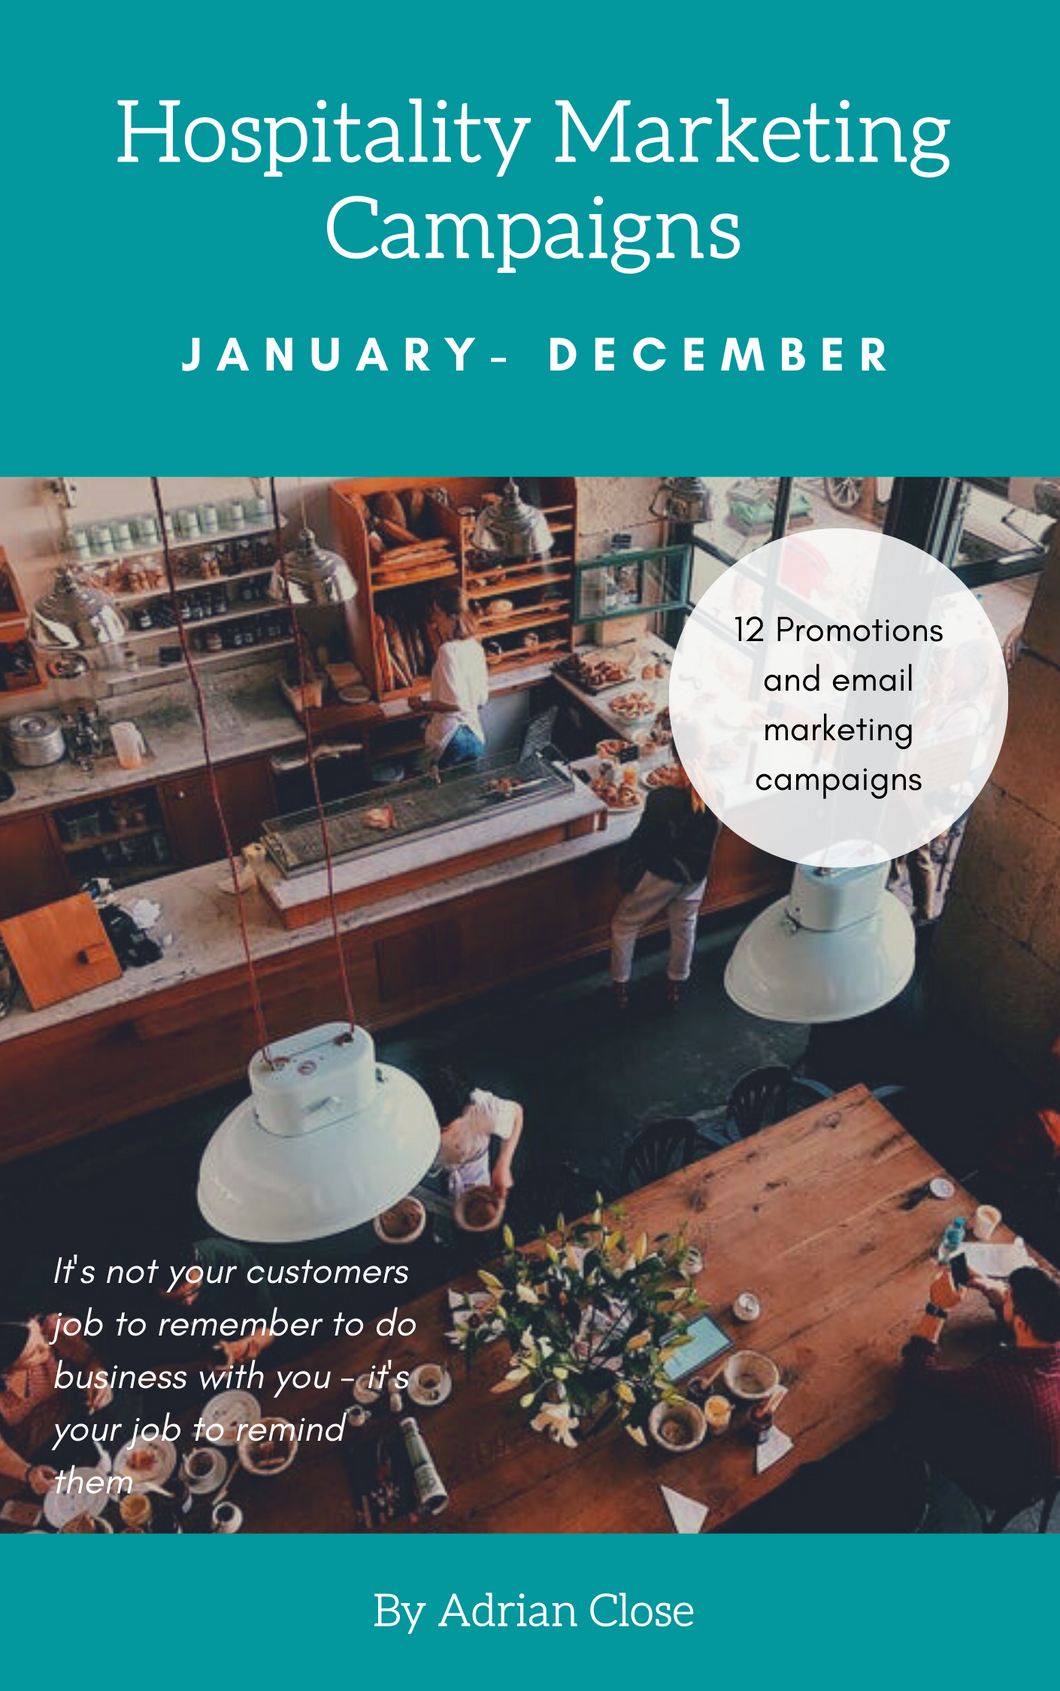 Hospitality Marketing Campaigns January to December